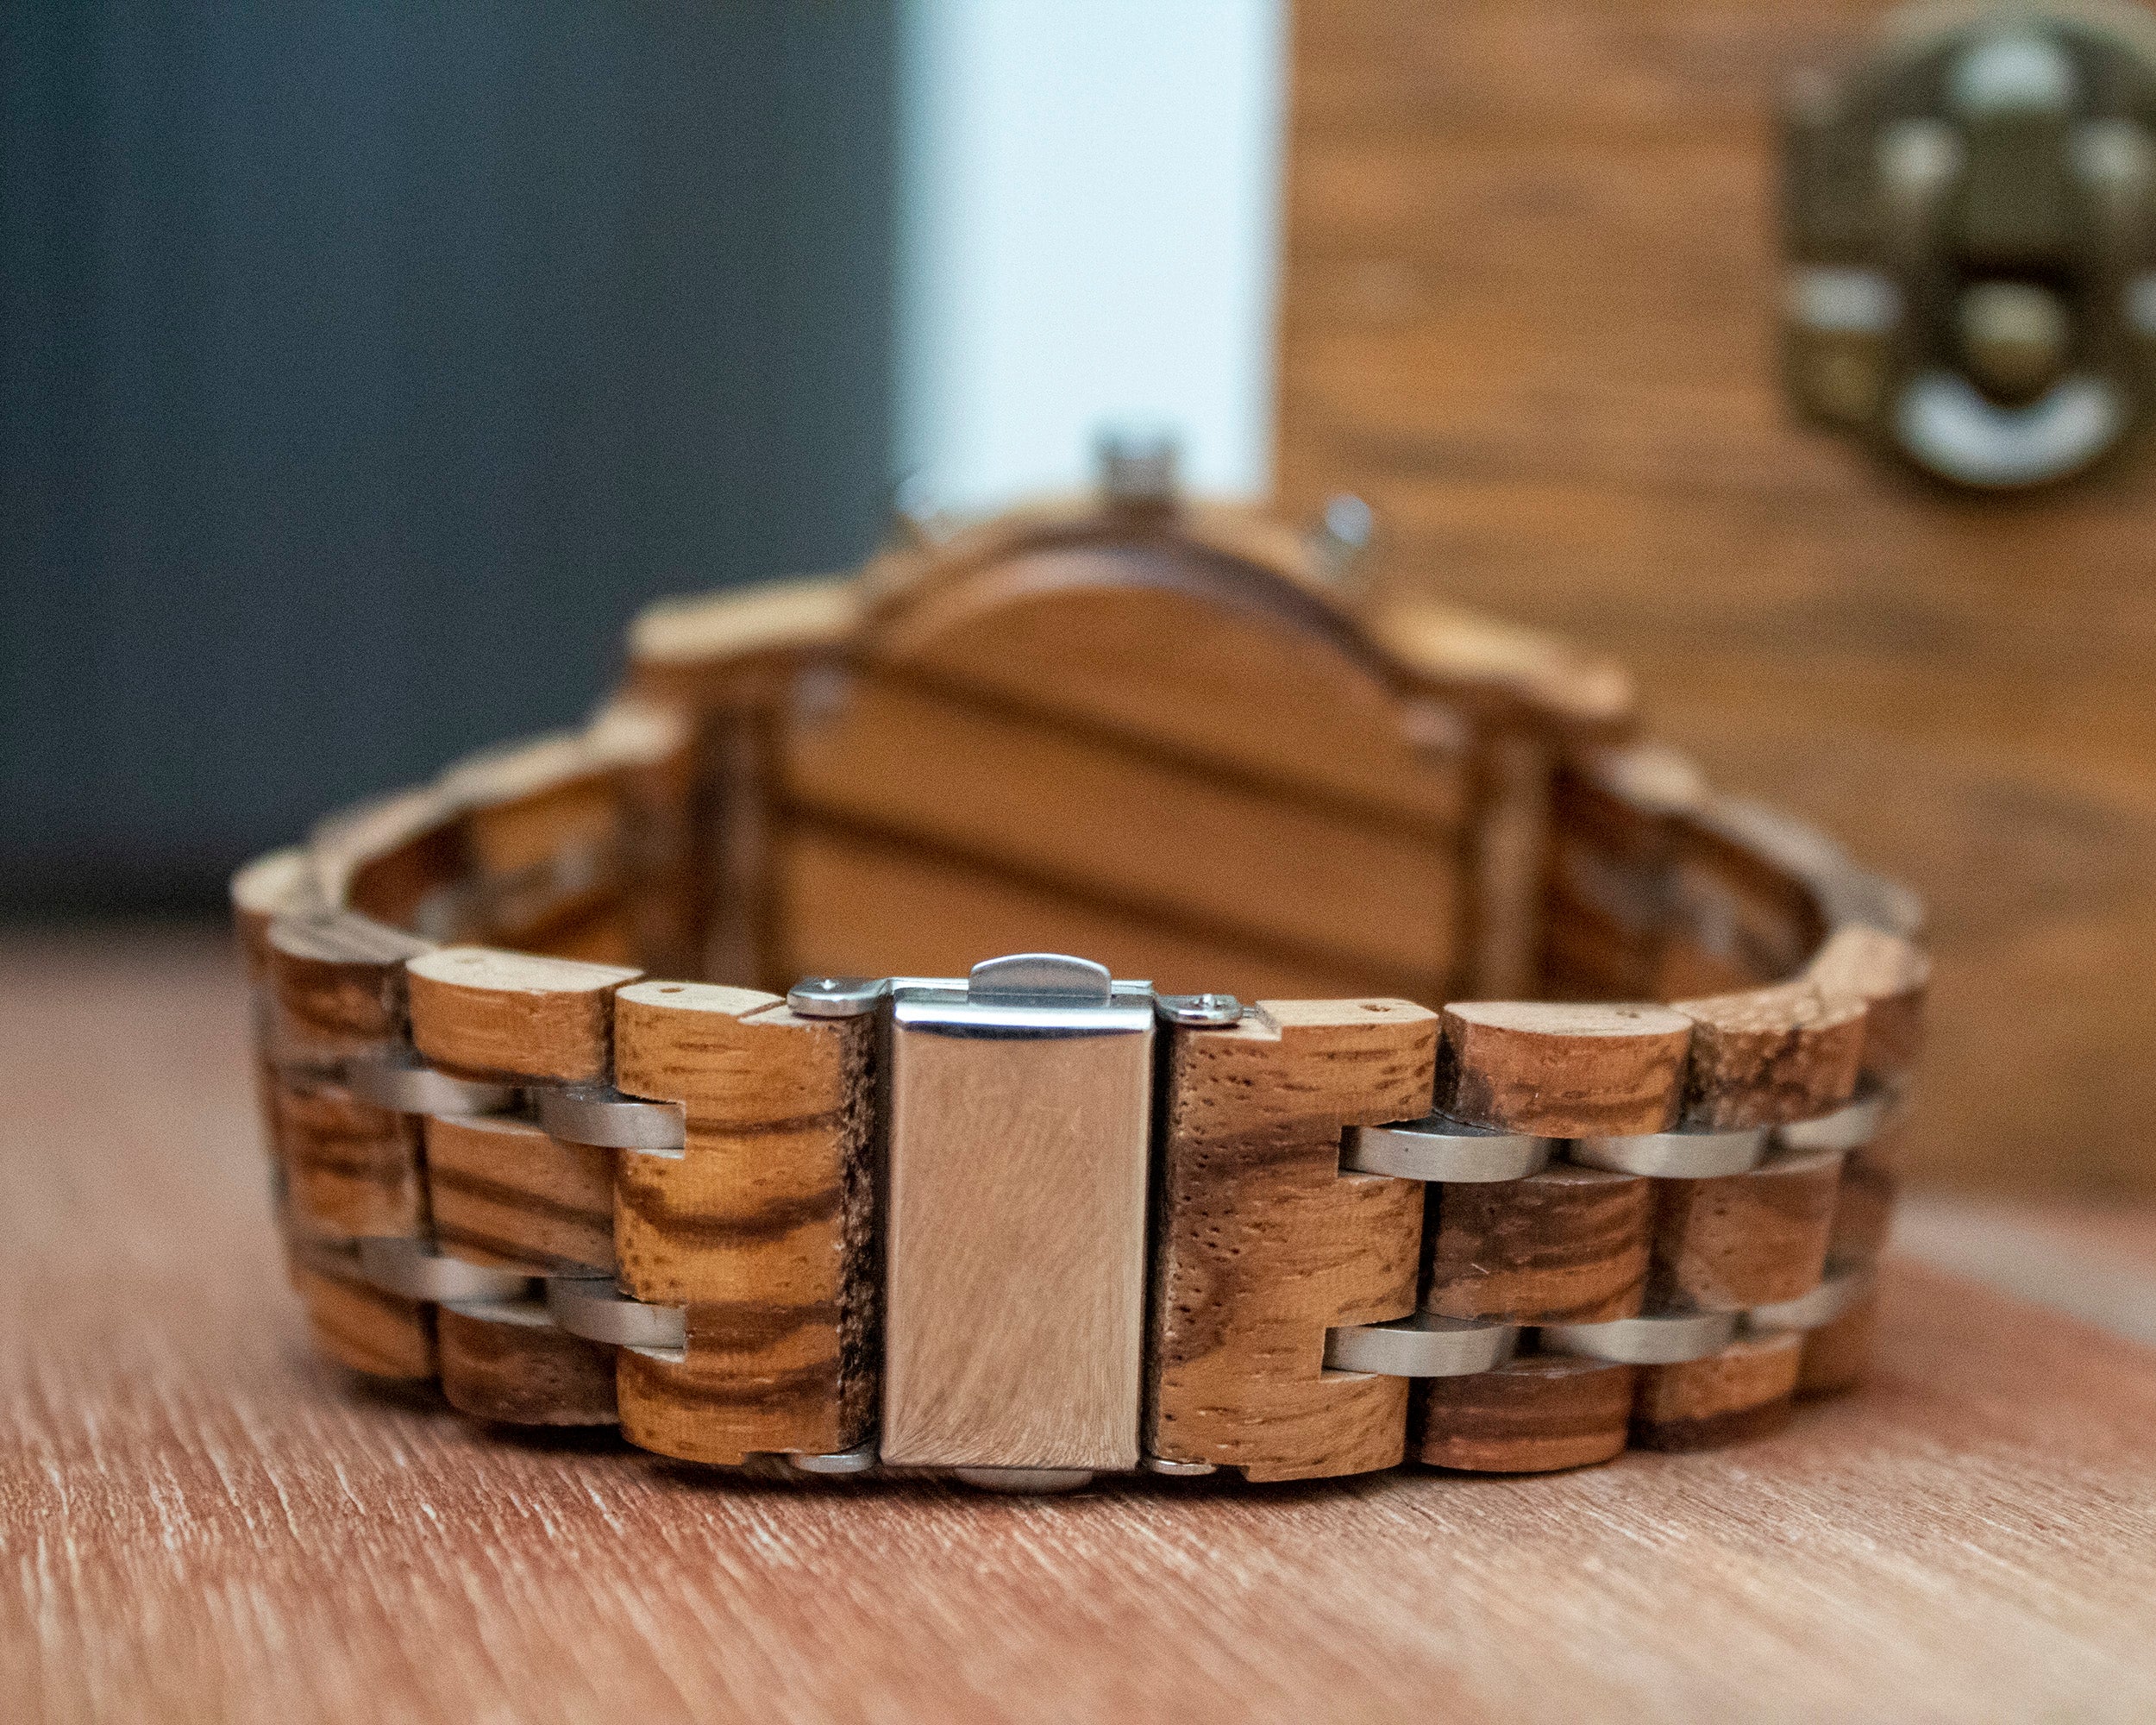 Elevate your style with the Krypton wooden watch - an eco-friendly timepiece made with real wood, featuring a comfortable fit and a brushed silver buckle. The natural wood design adds a unique touch to your everyday wear, and each watch comes in a beautiful box, making it the perfect gift or addition to your collection. Shop now!